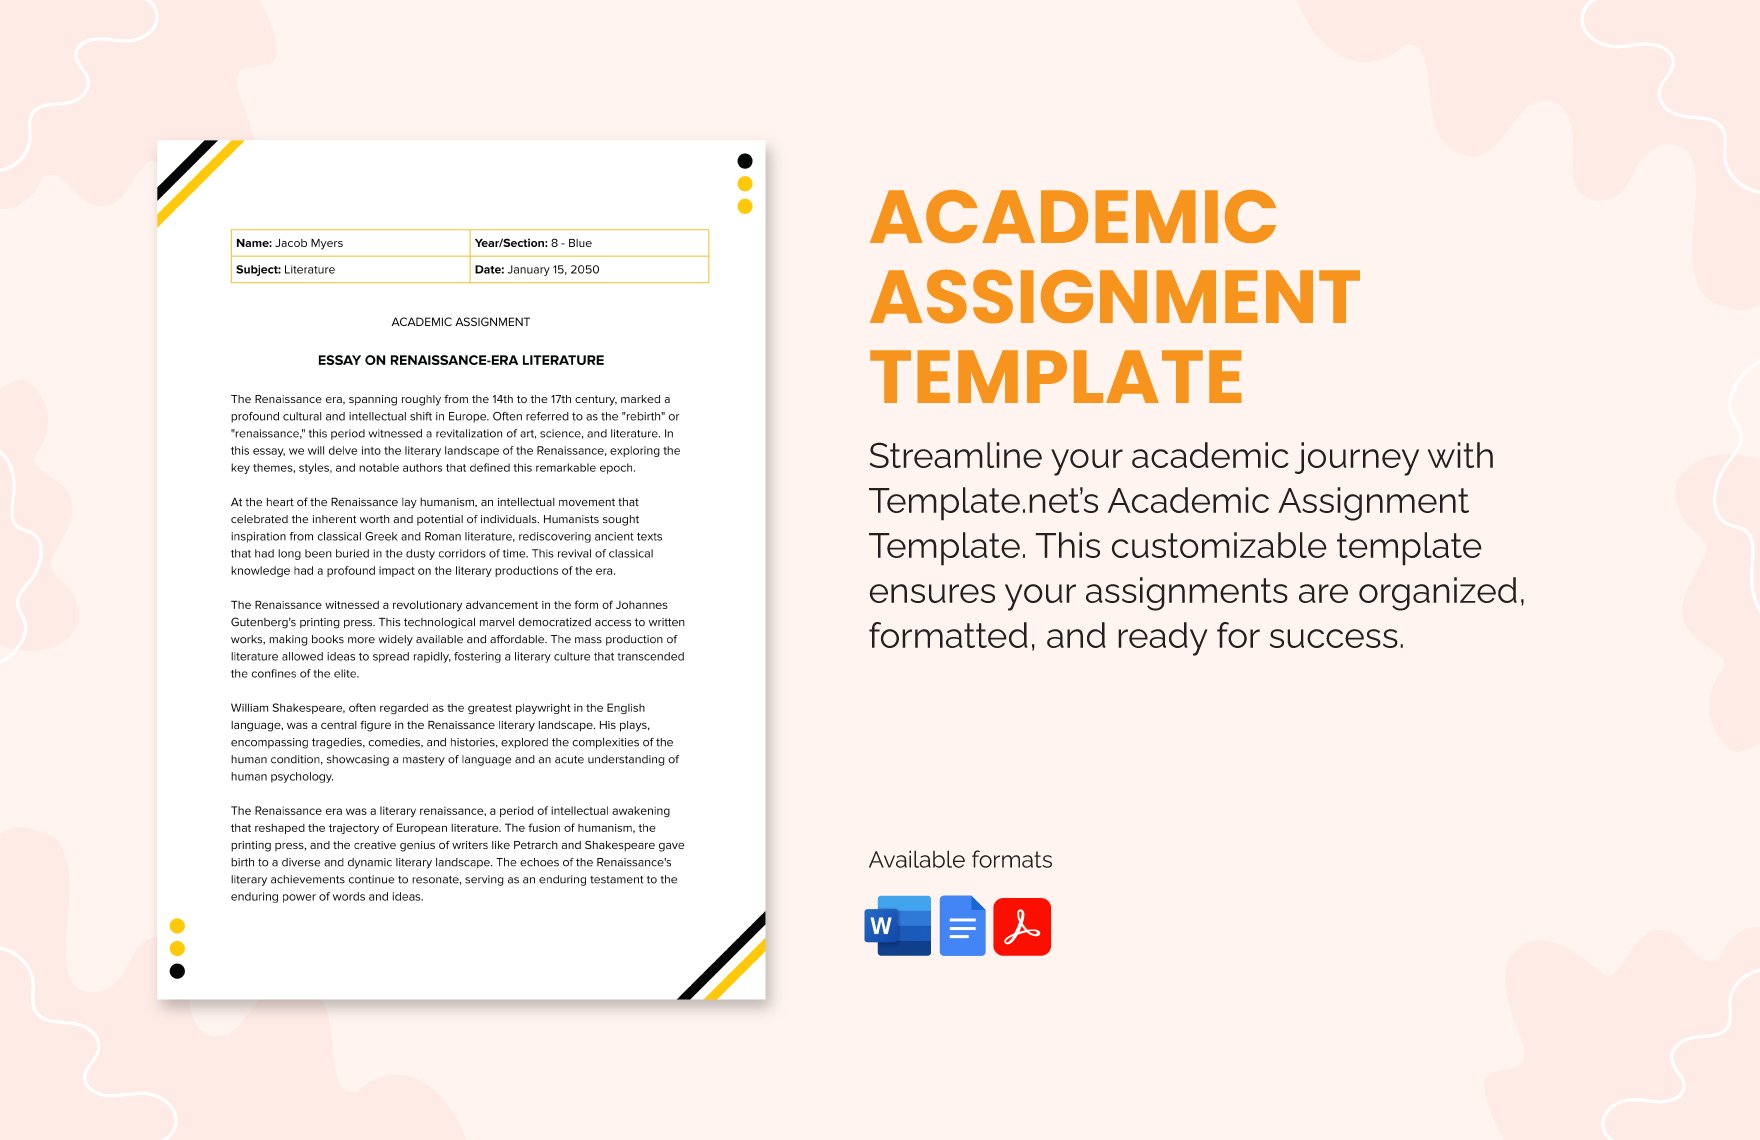 Free Academic Assignment Template in Word, Google Docs, PDF